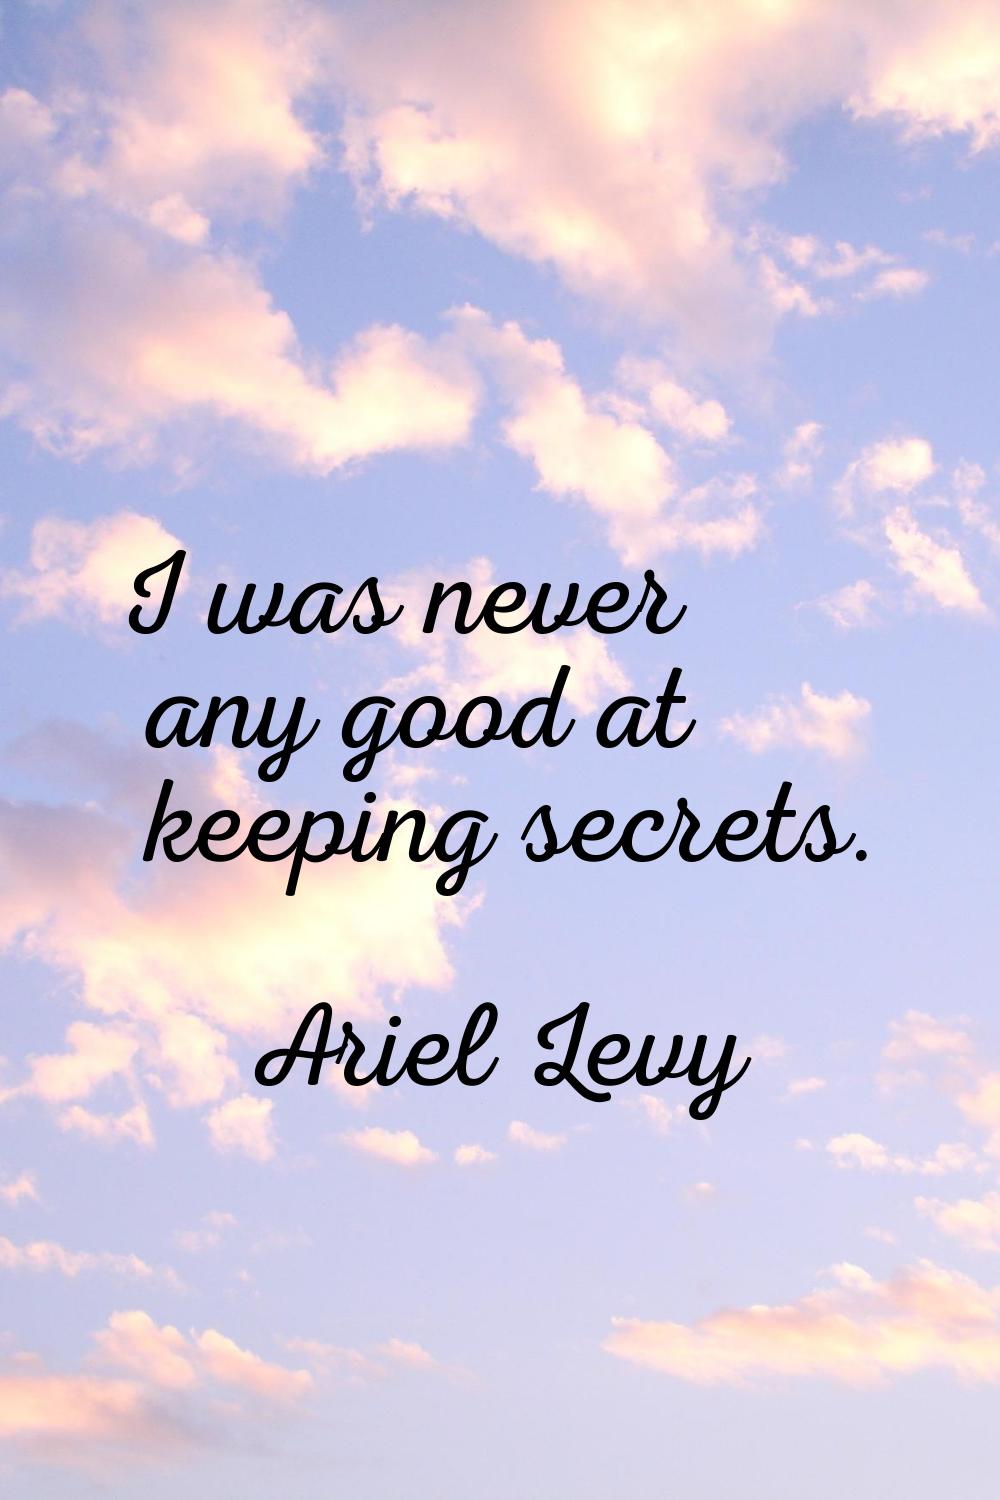 I was never any good at keeping secrets.